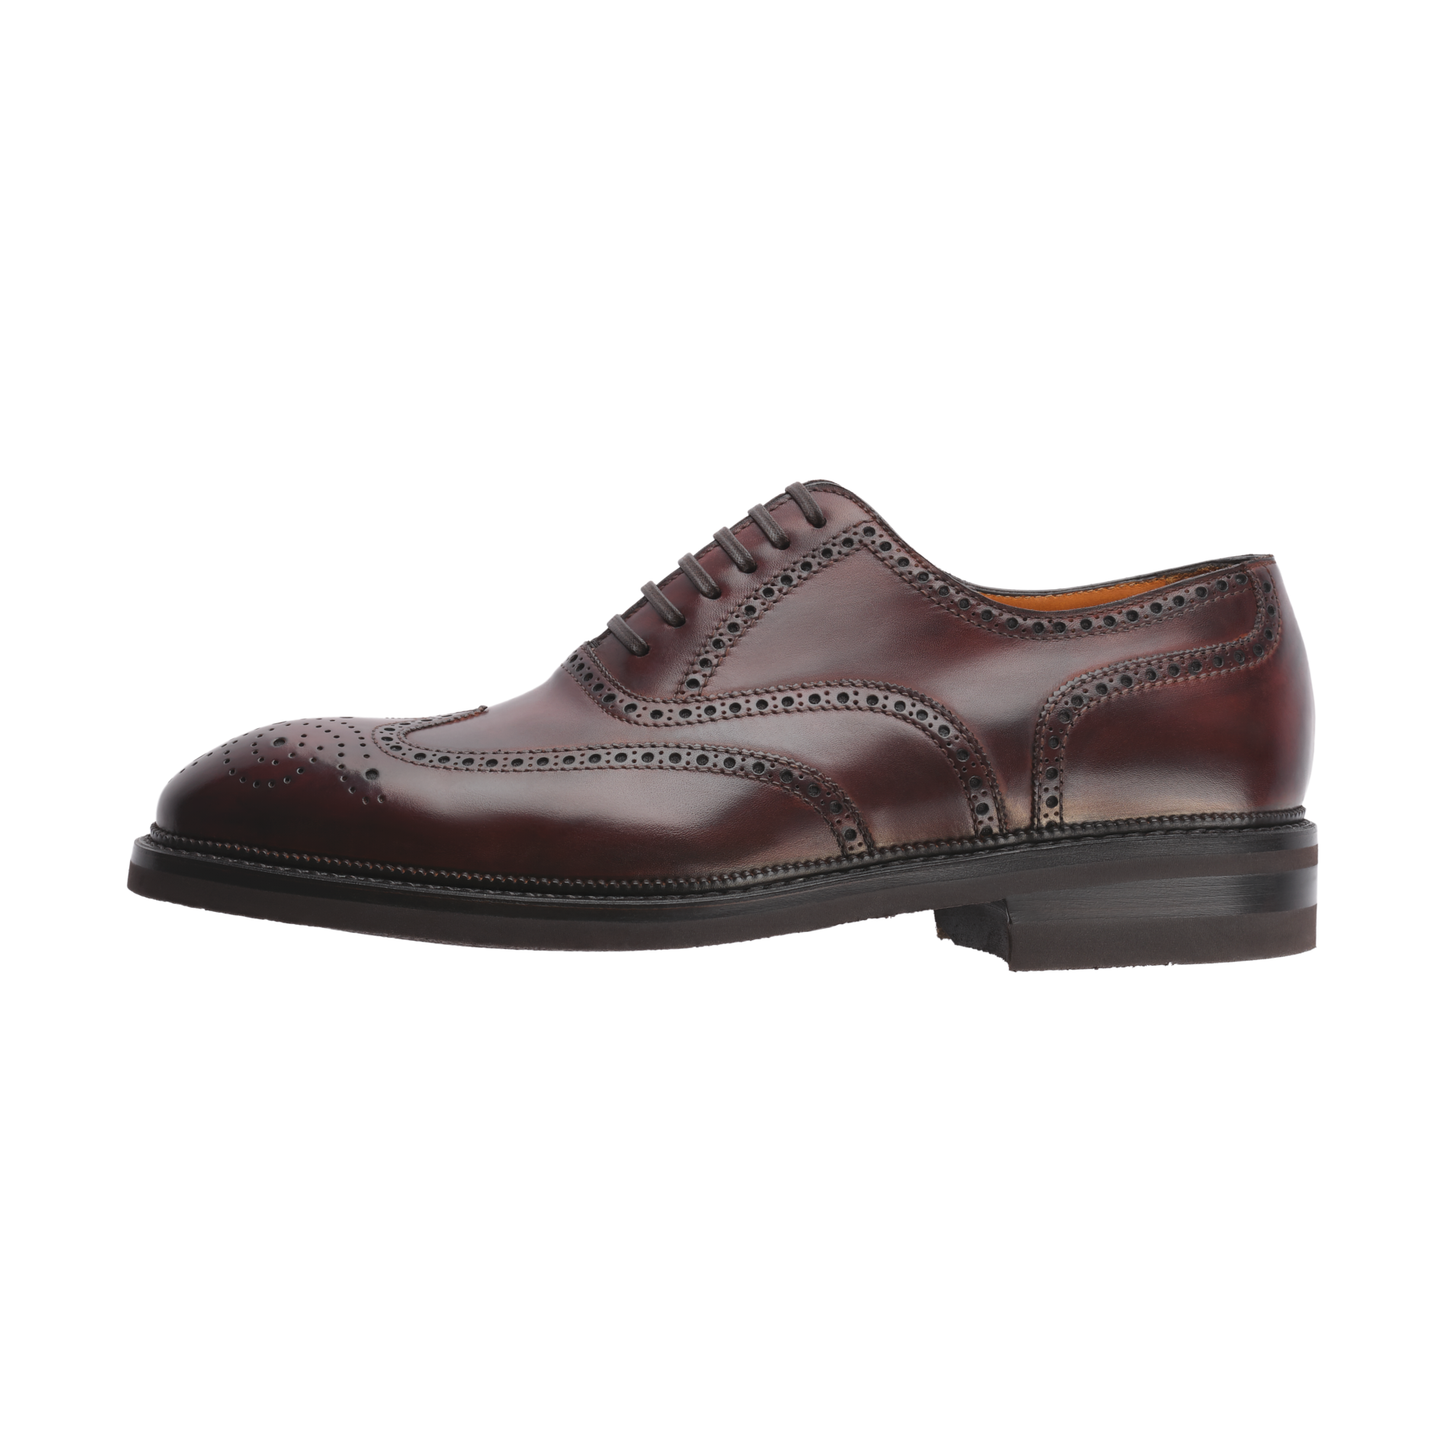 Bontoni «Libertino» Six-Eyelet Oxford Shoes with Perforated Details and Medallion in Marrone Brown - SARTALE